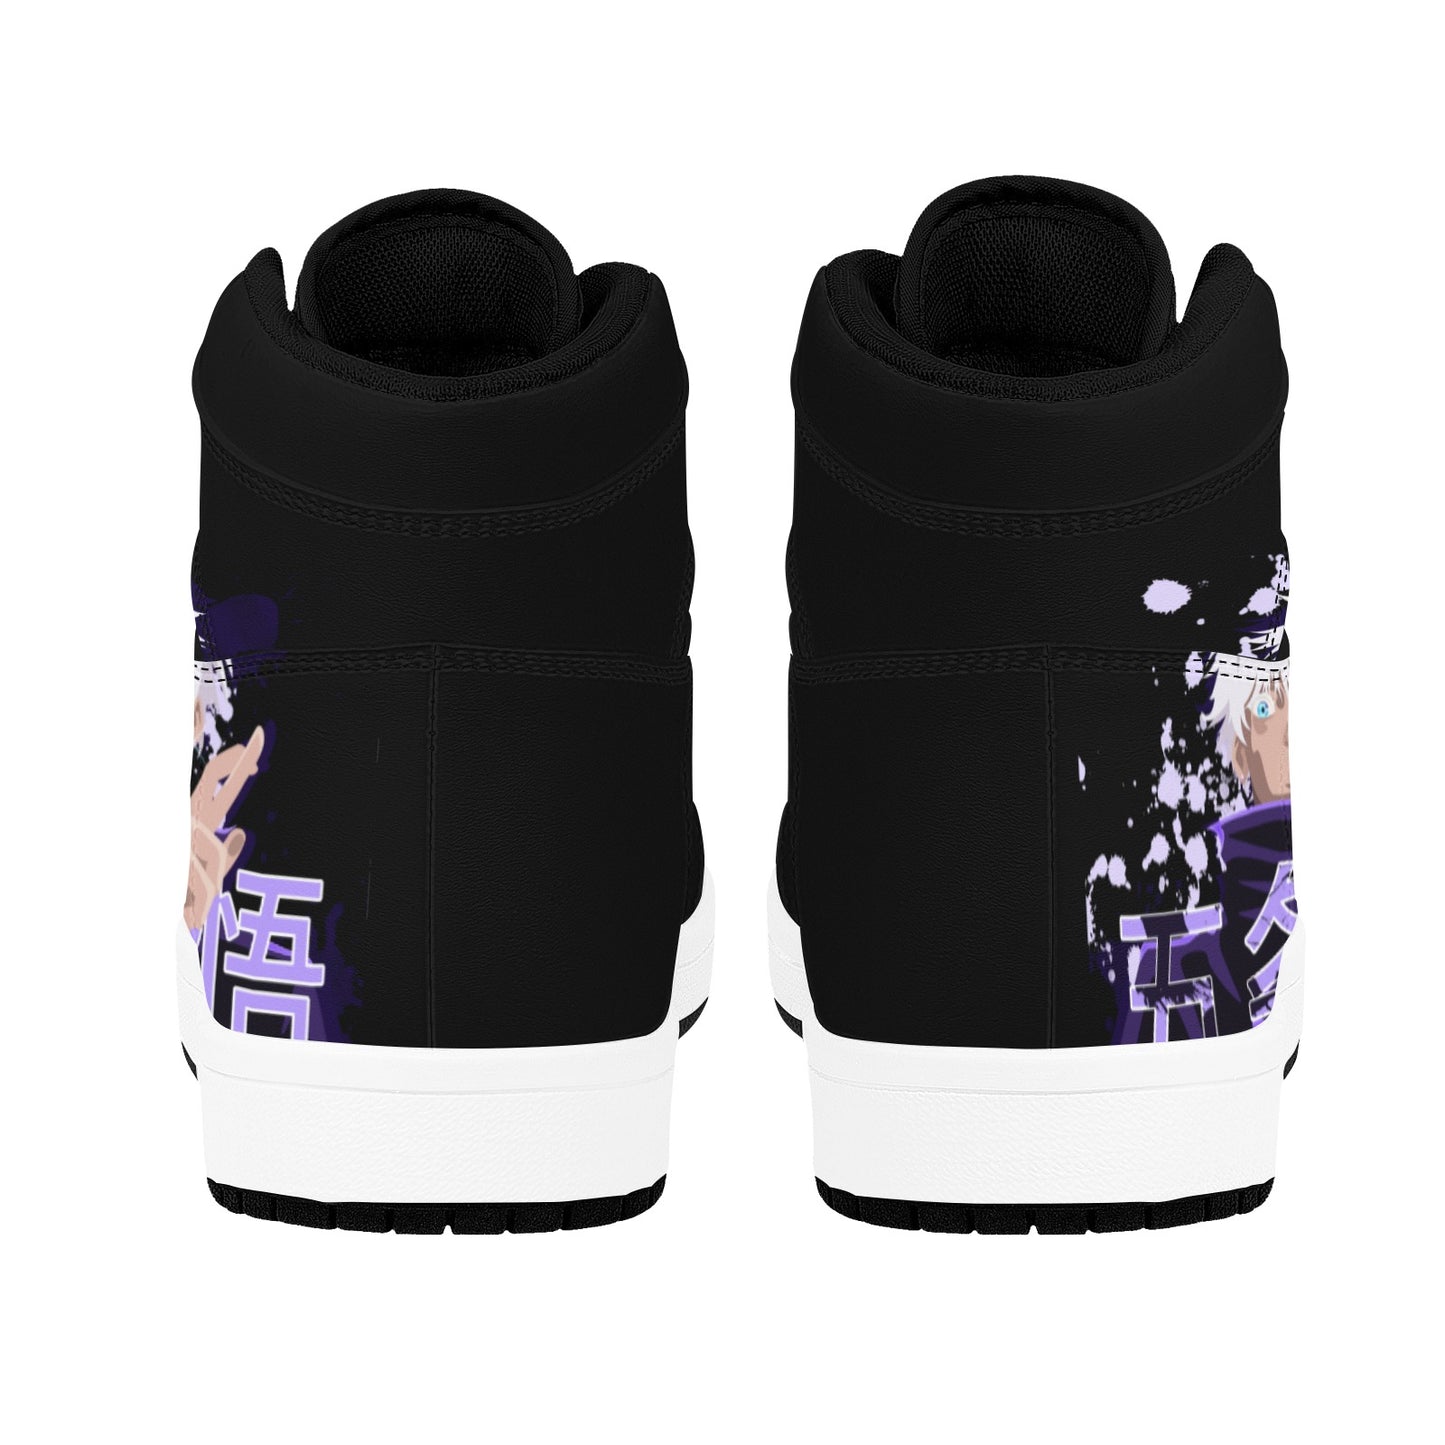 Black High Top Sneakers Anime Inspired High Top Sneakers Men's High Top Sneakers